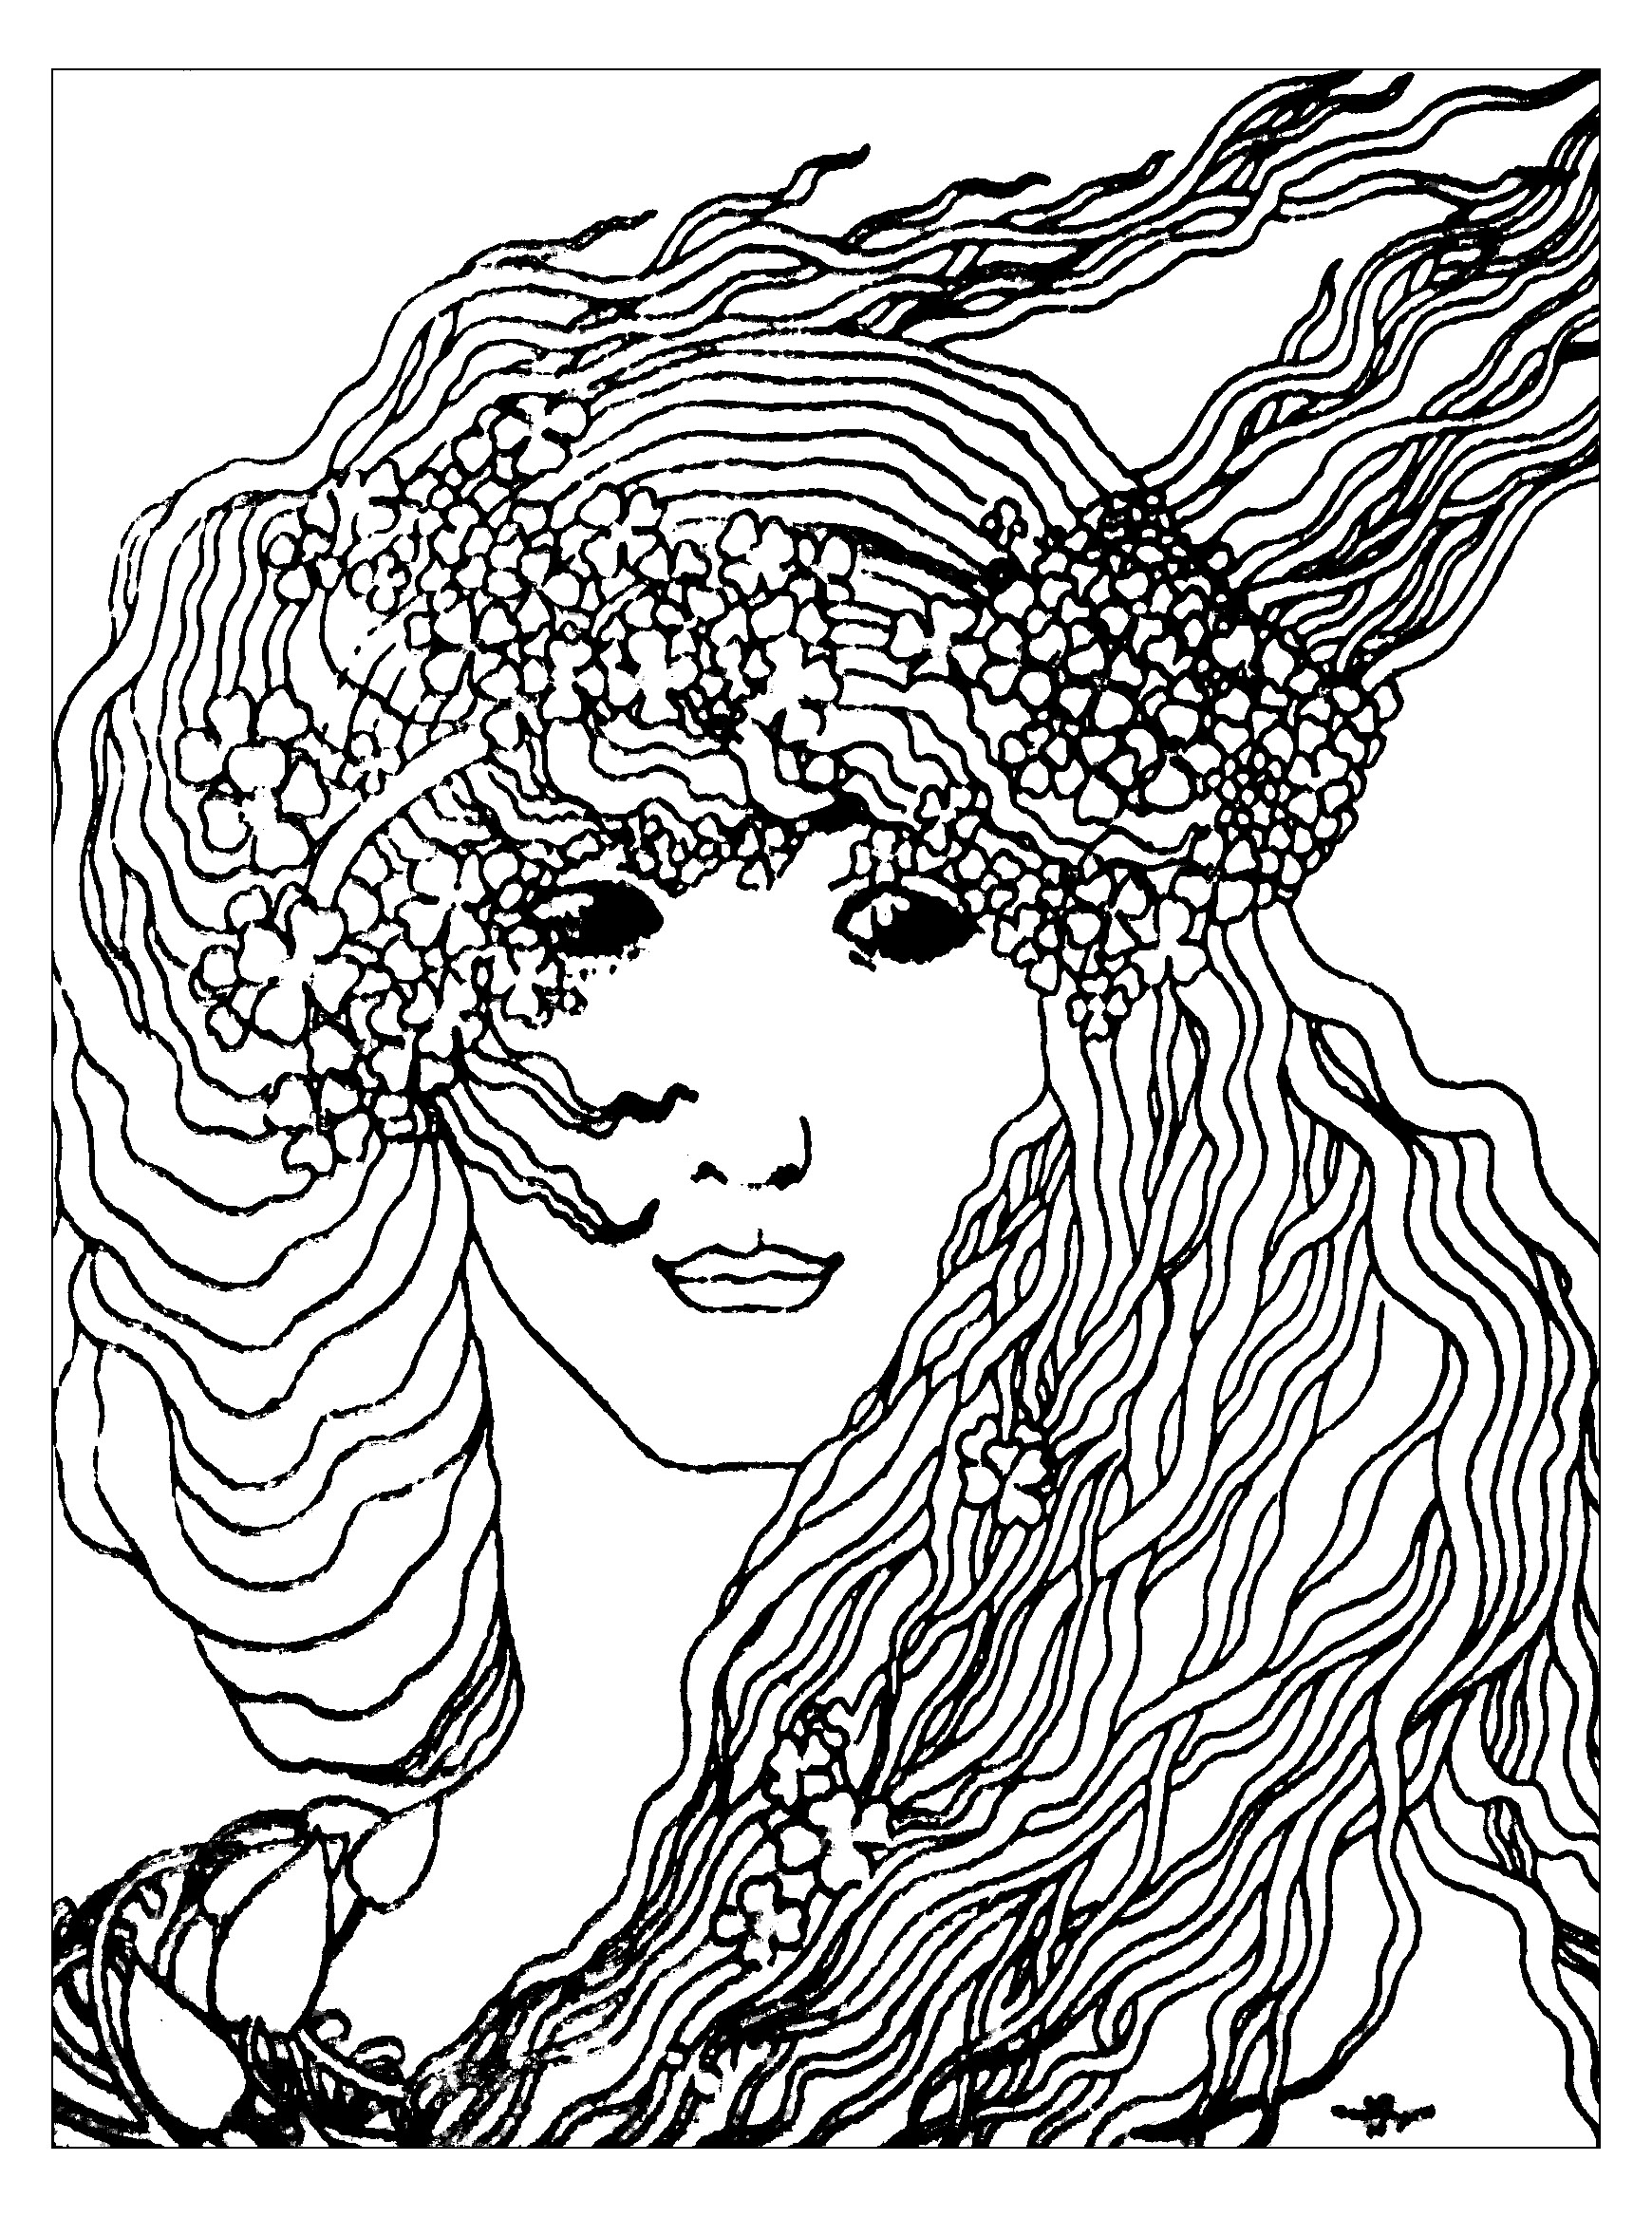 Coloring page from 'Climax' by Aubrey Vincent Beardsley (1893)